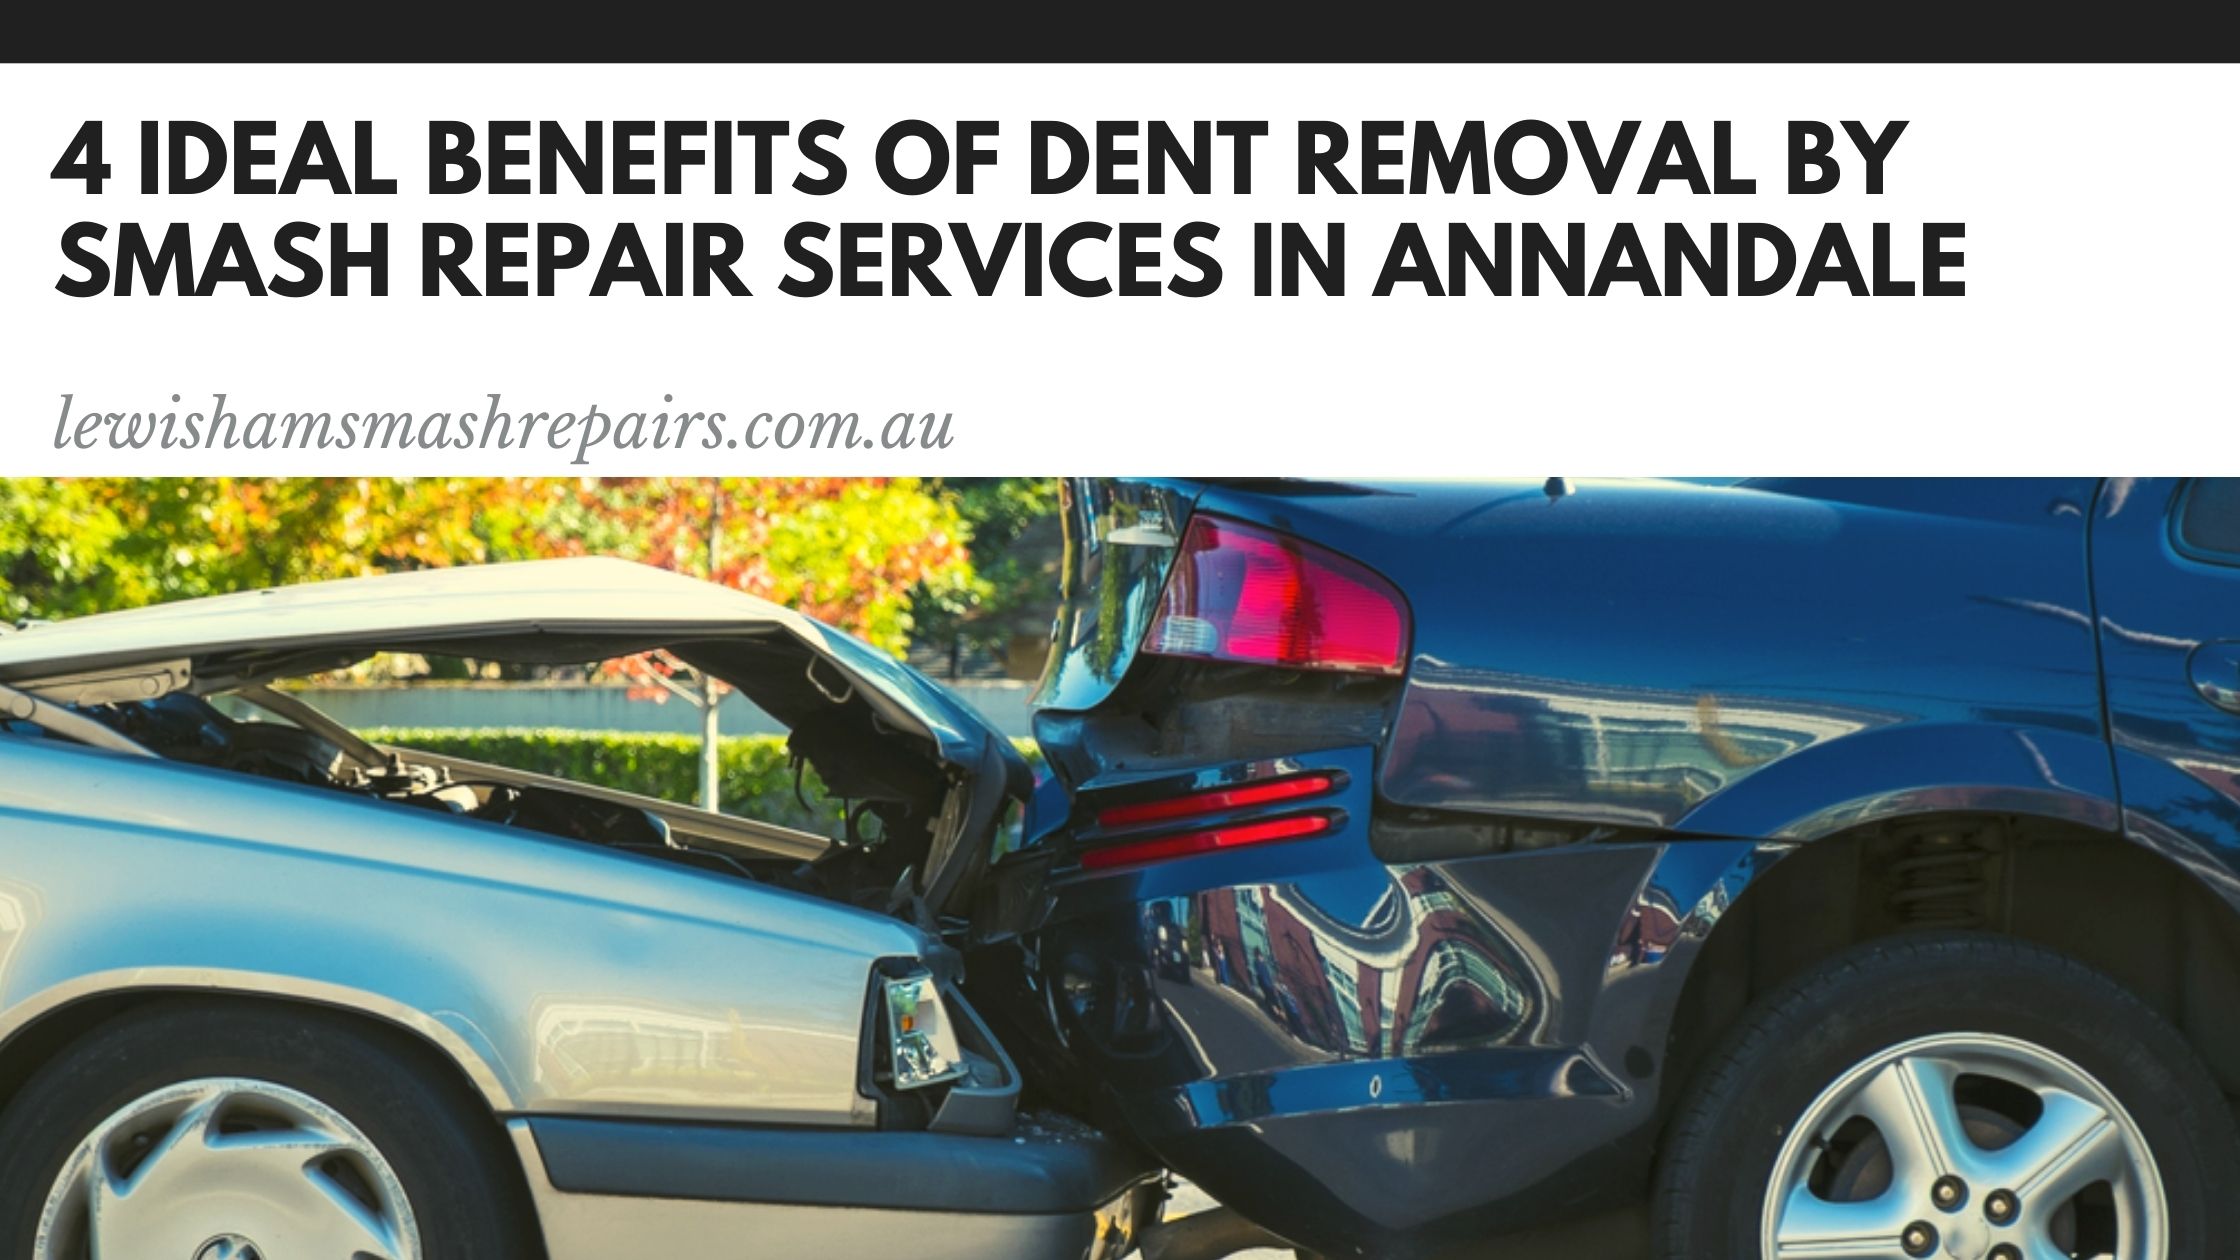 4 ideal benefits of dent removal by smash repair services in Annandale